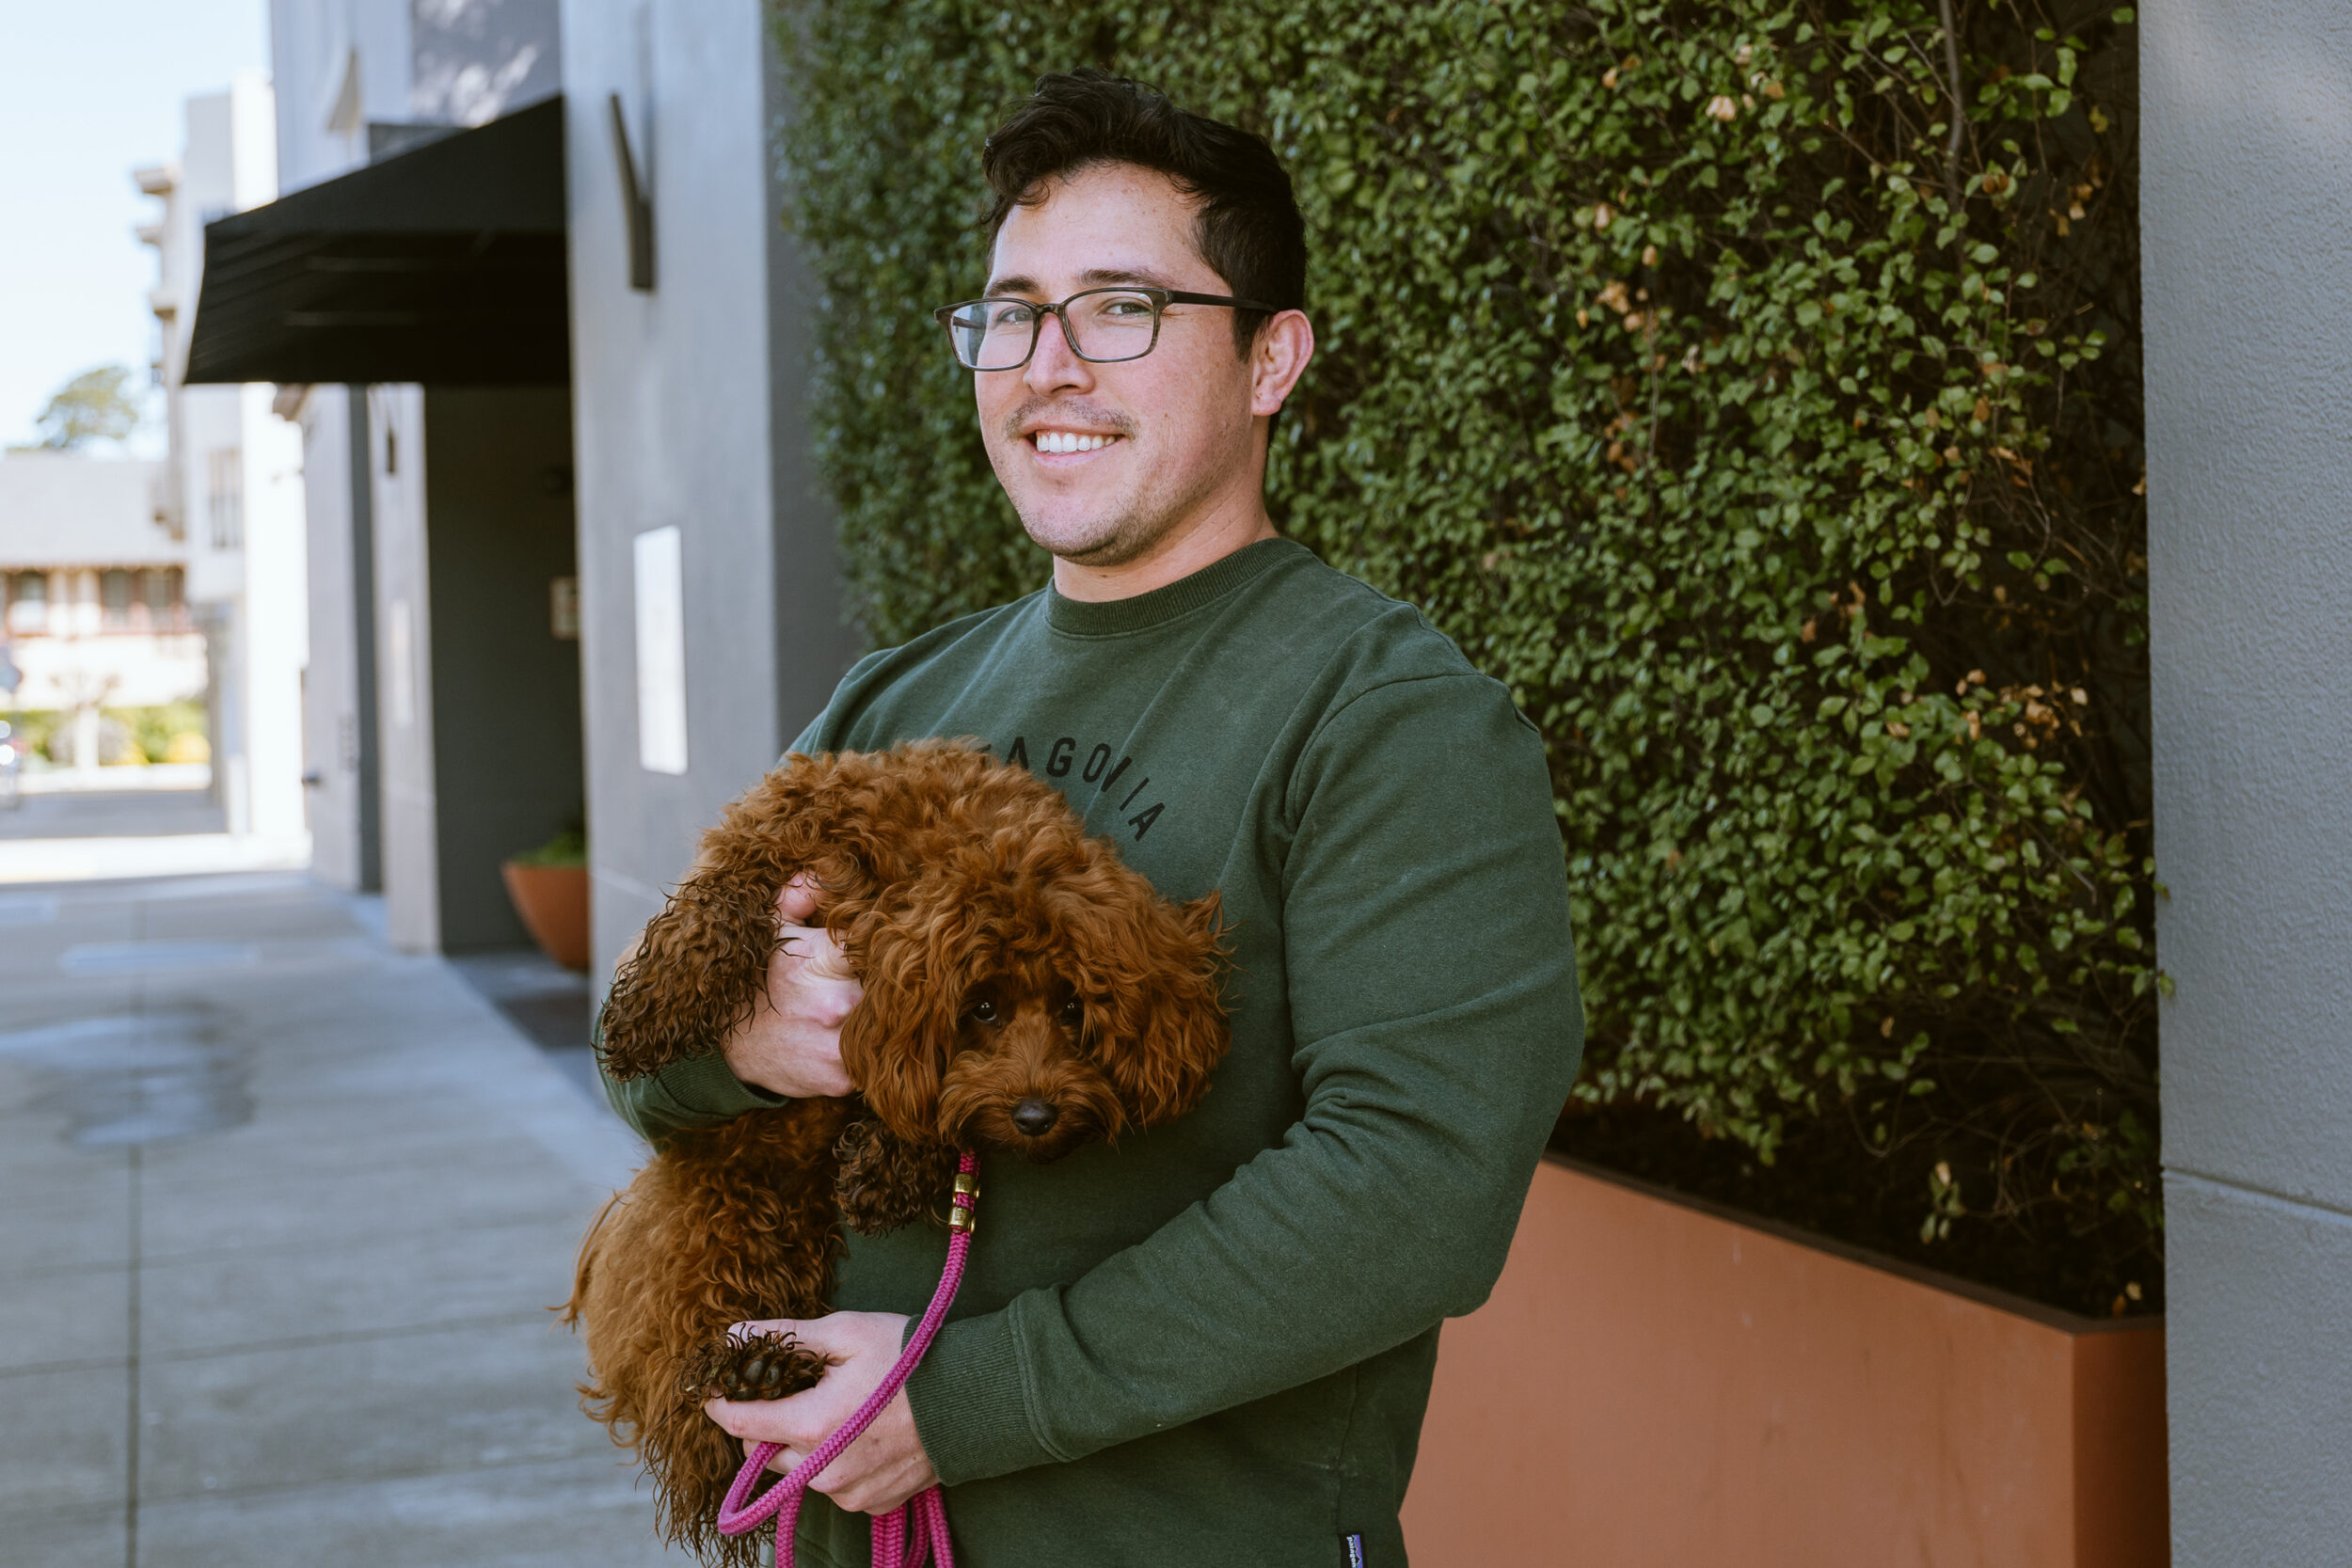 A smiling man in glasses holds a curly-haired dog outdoors near a leafy wall.